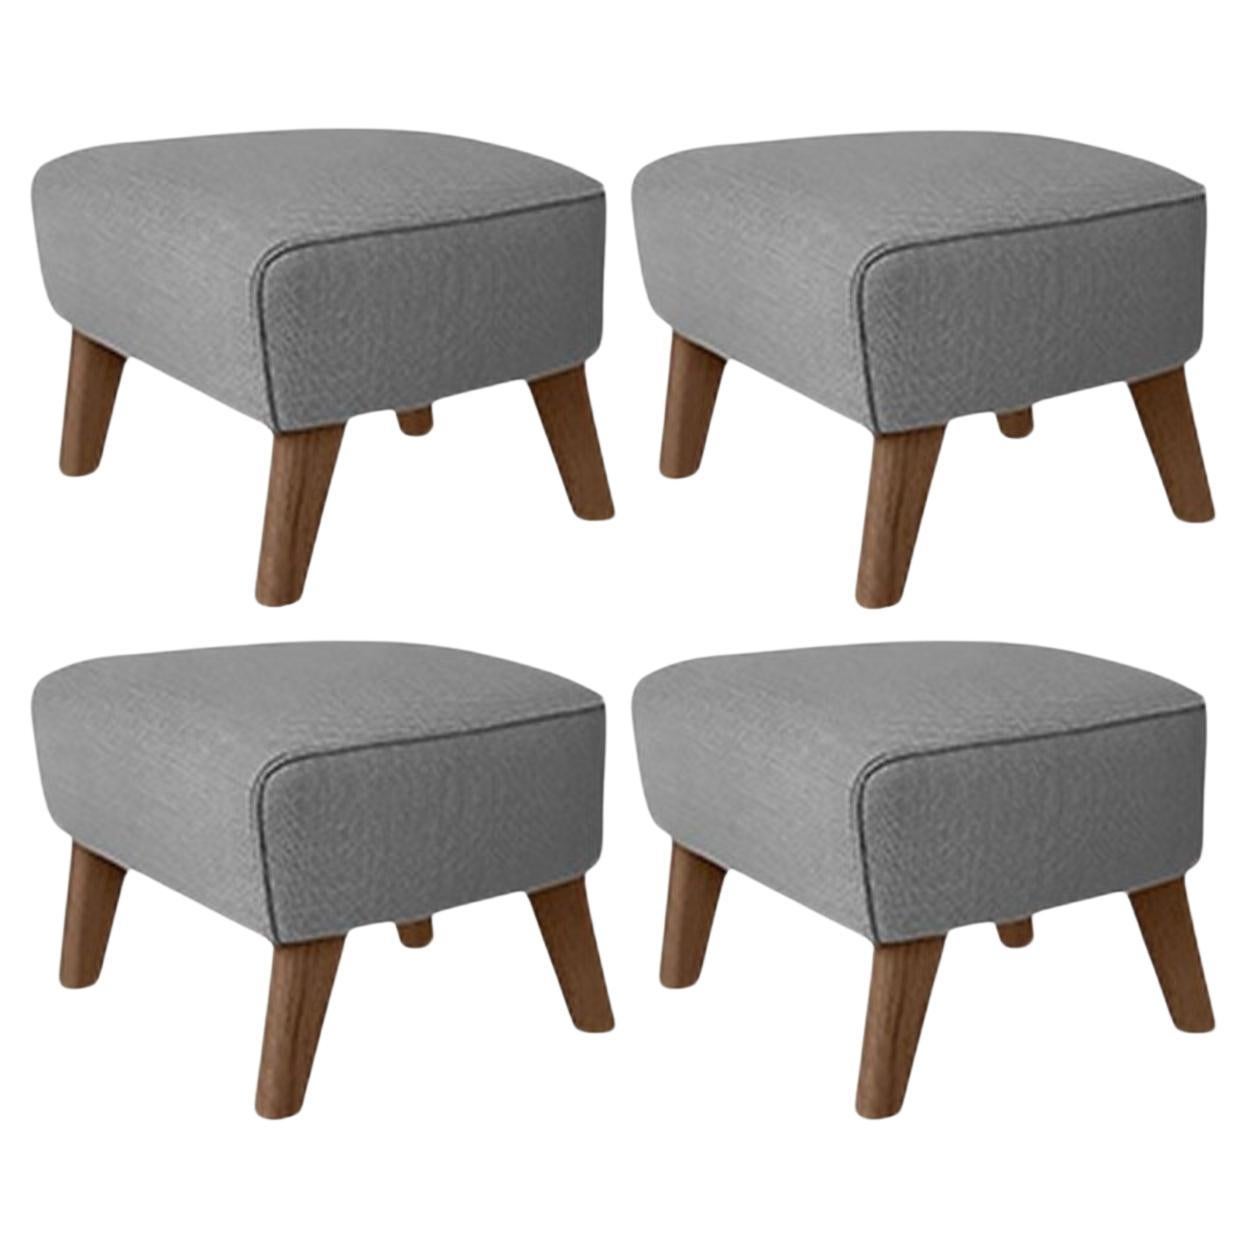 Set of 4 Grey and Smoked Oak Raf Simons Vidar 3 My Own Chair Footstool by Lassen For Sale